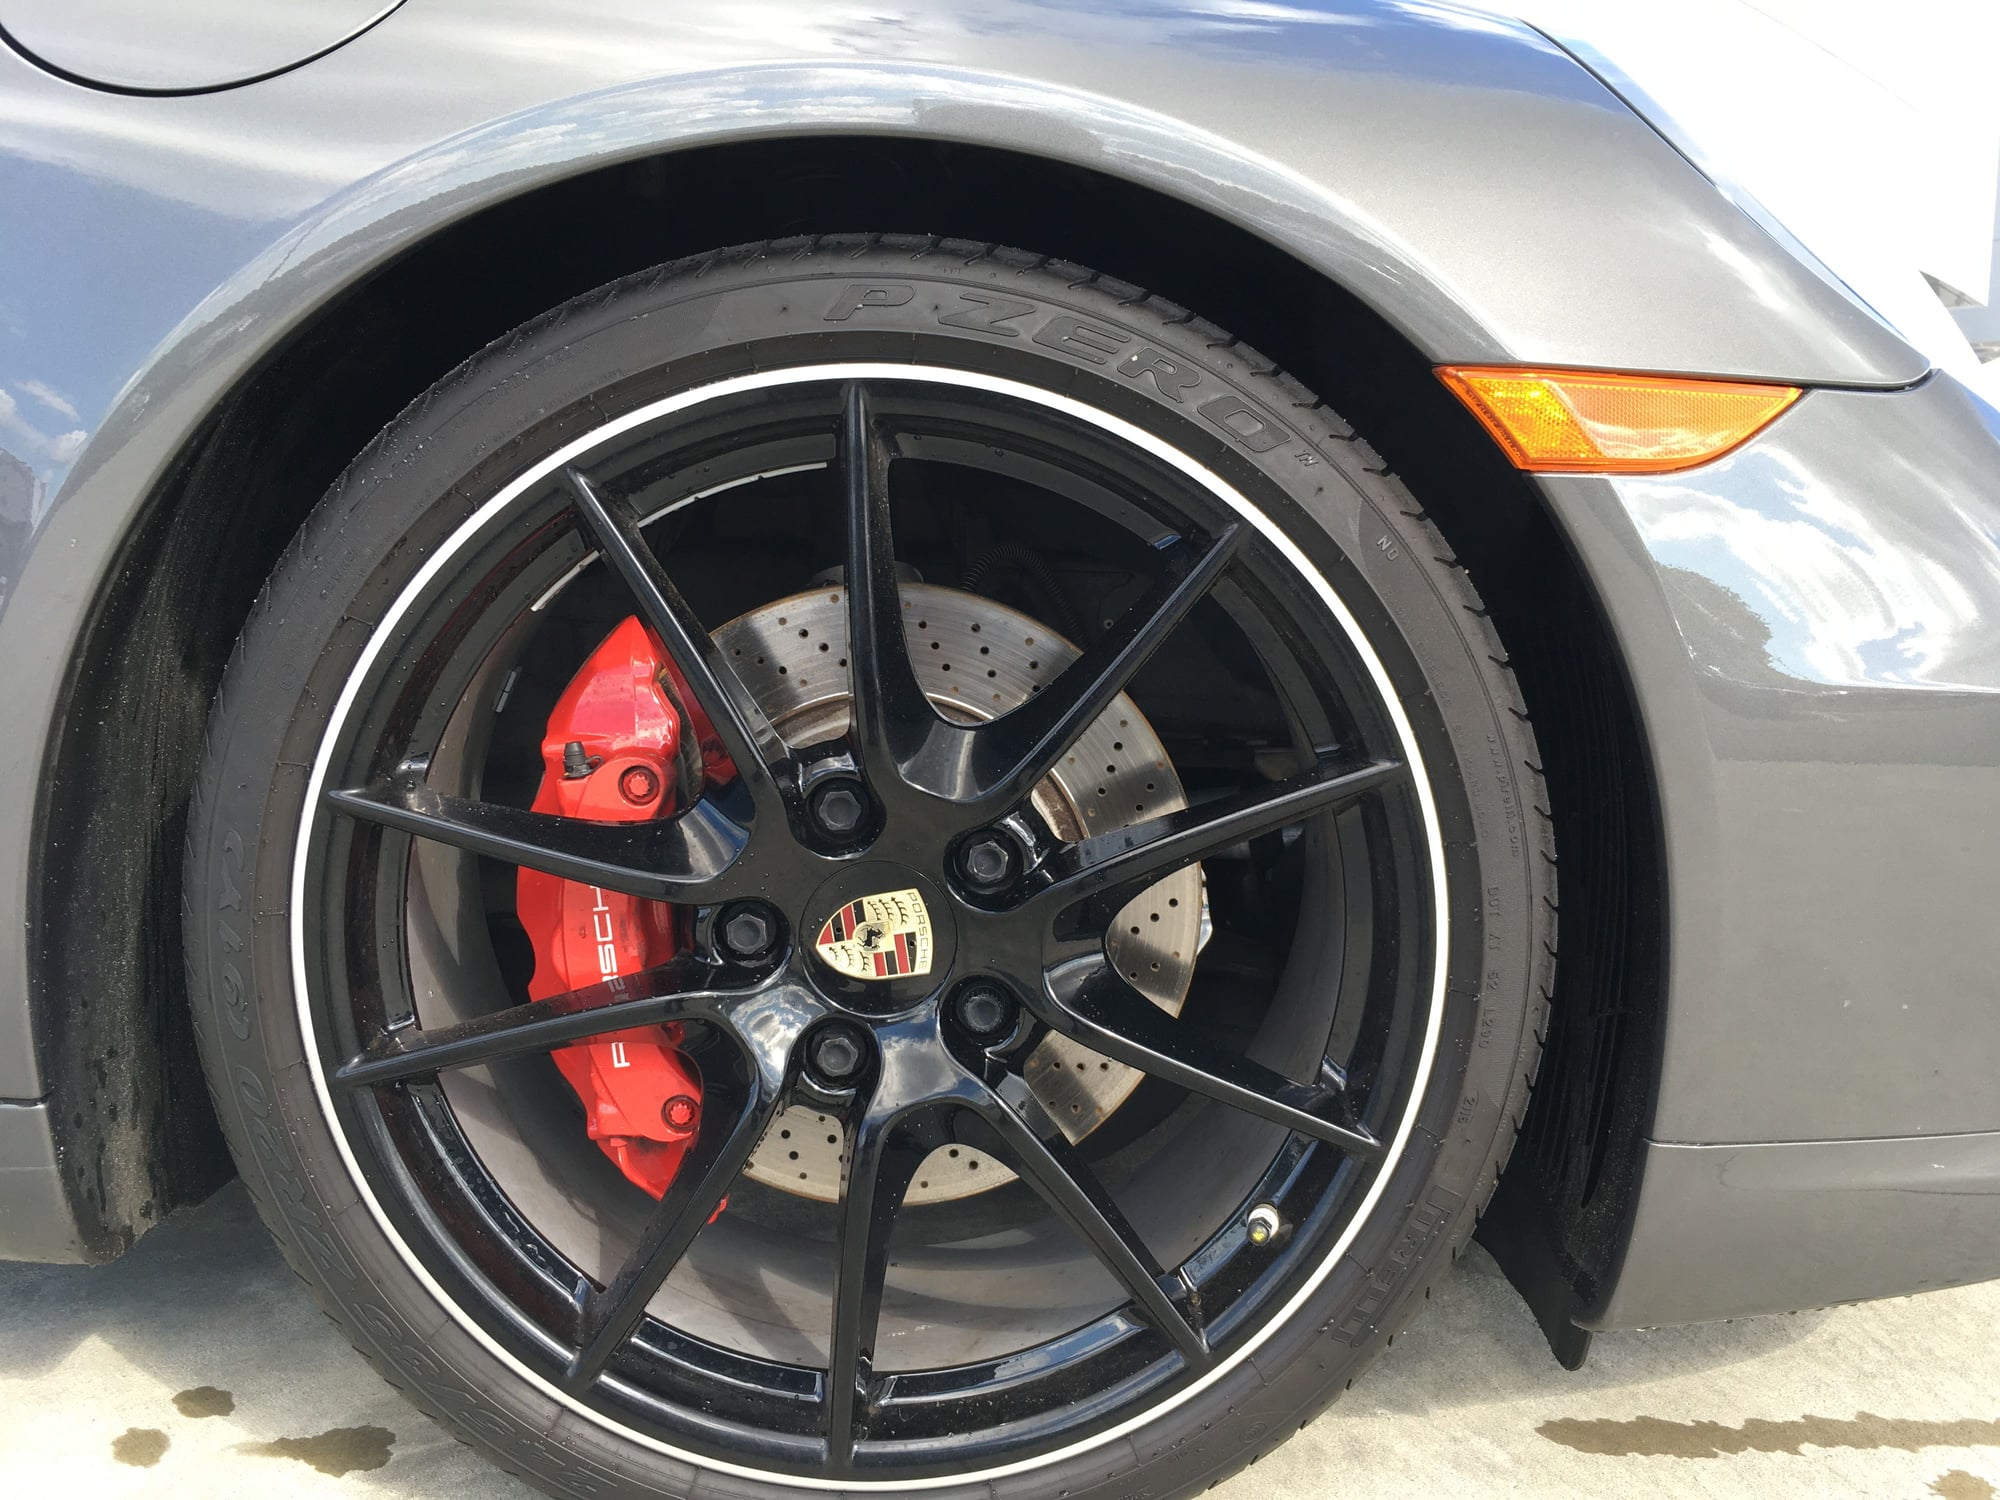 Wheels and Tires/Axles - WTB: 20" Carrera S III Front Wheel for 991 - Used - 2012 to 2013 Porsche 911 - Fort Mill, SC 29708, United States